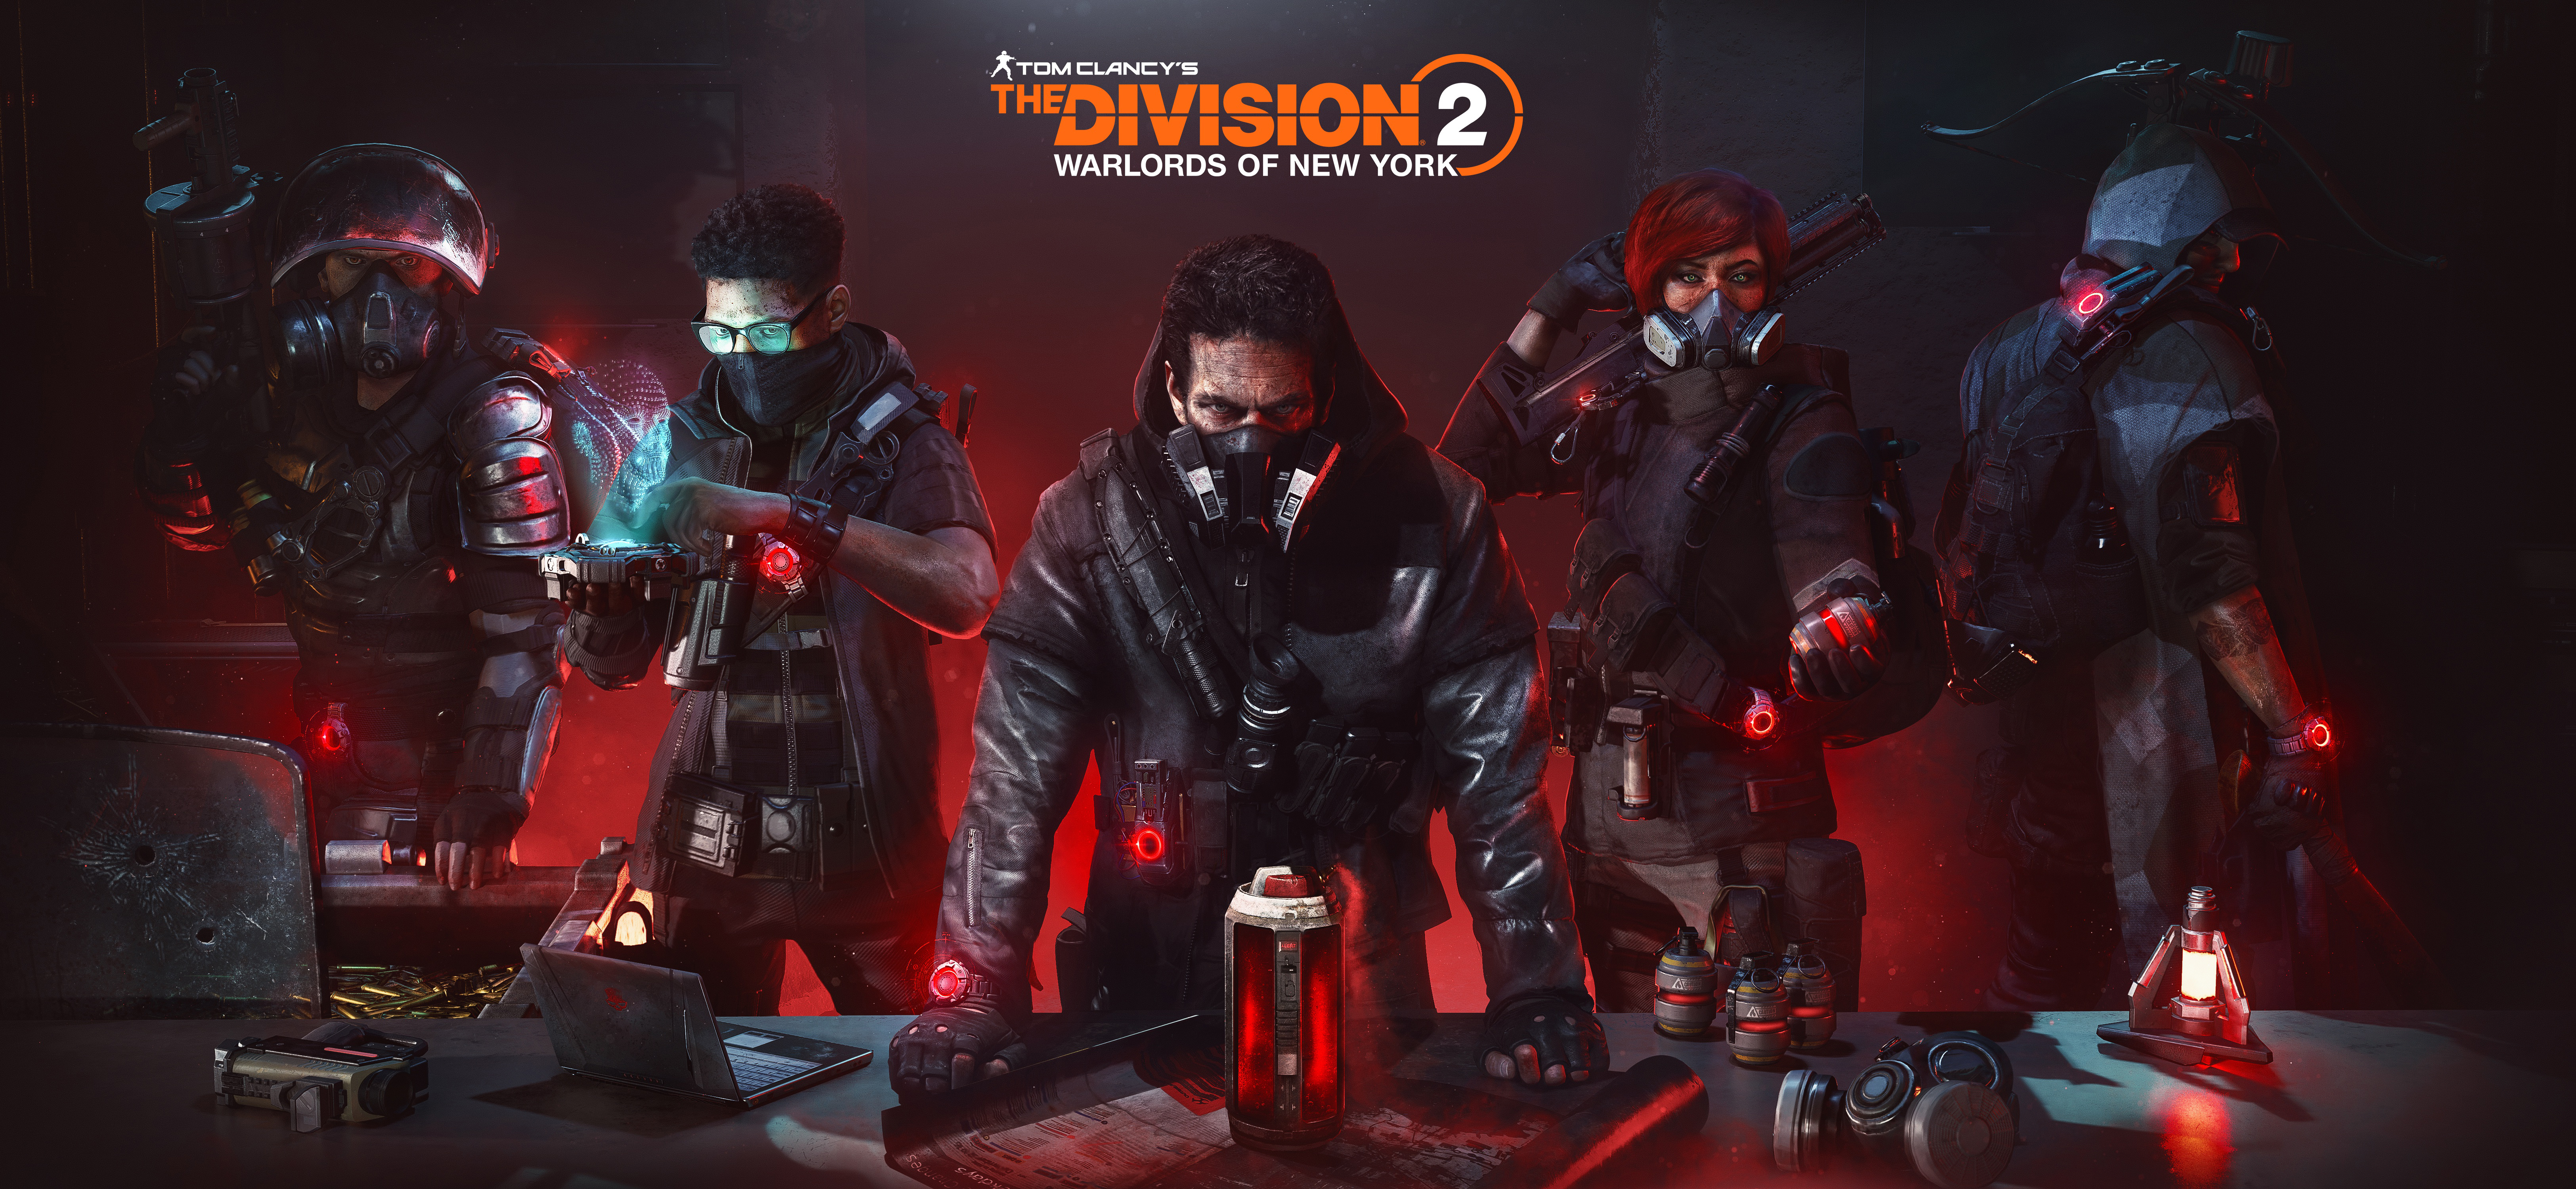 tom clancy's the division 2, video game